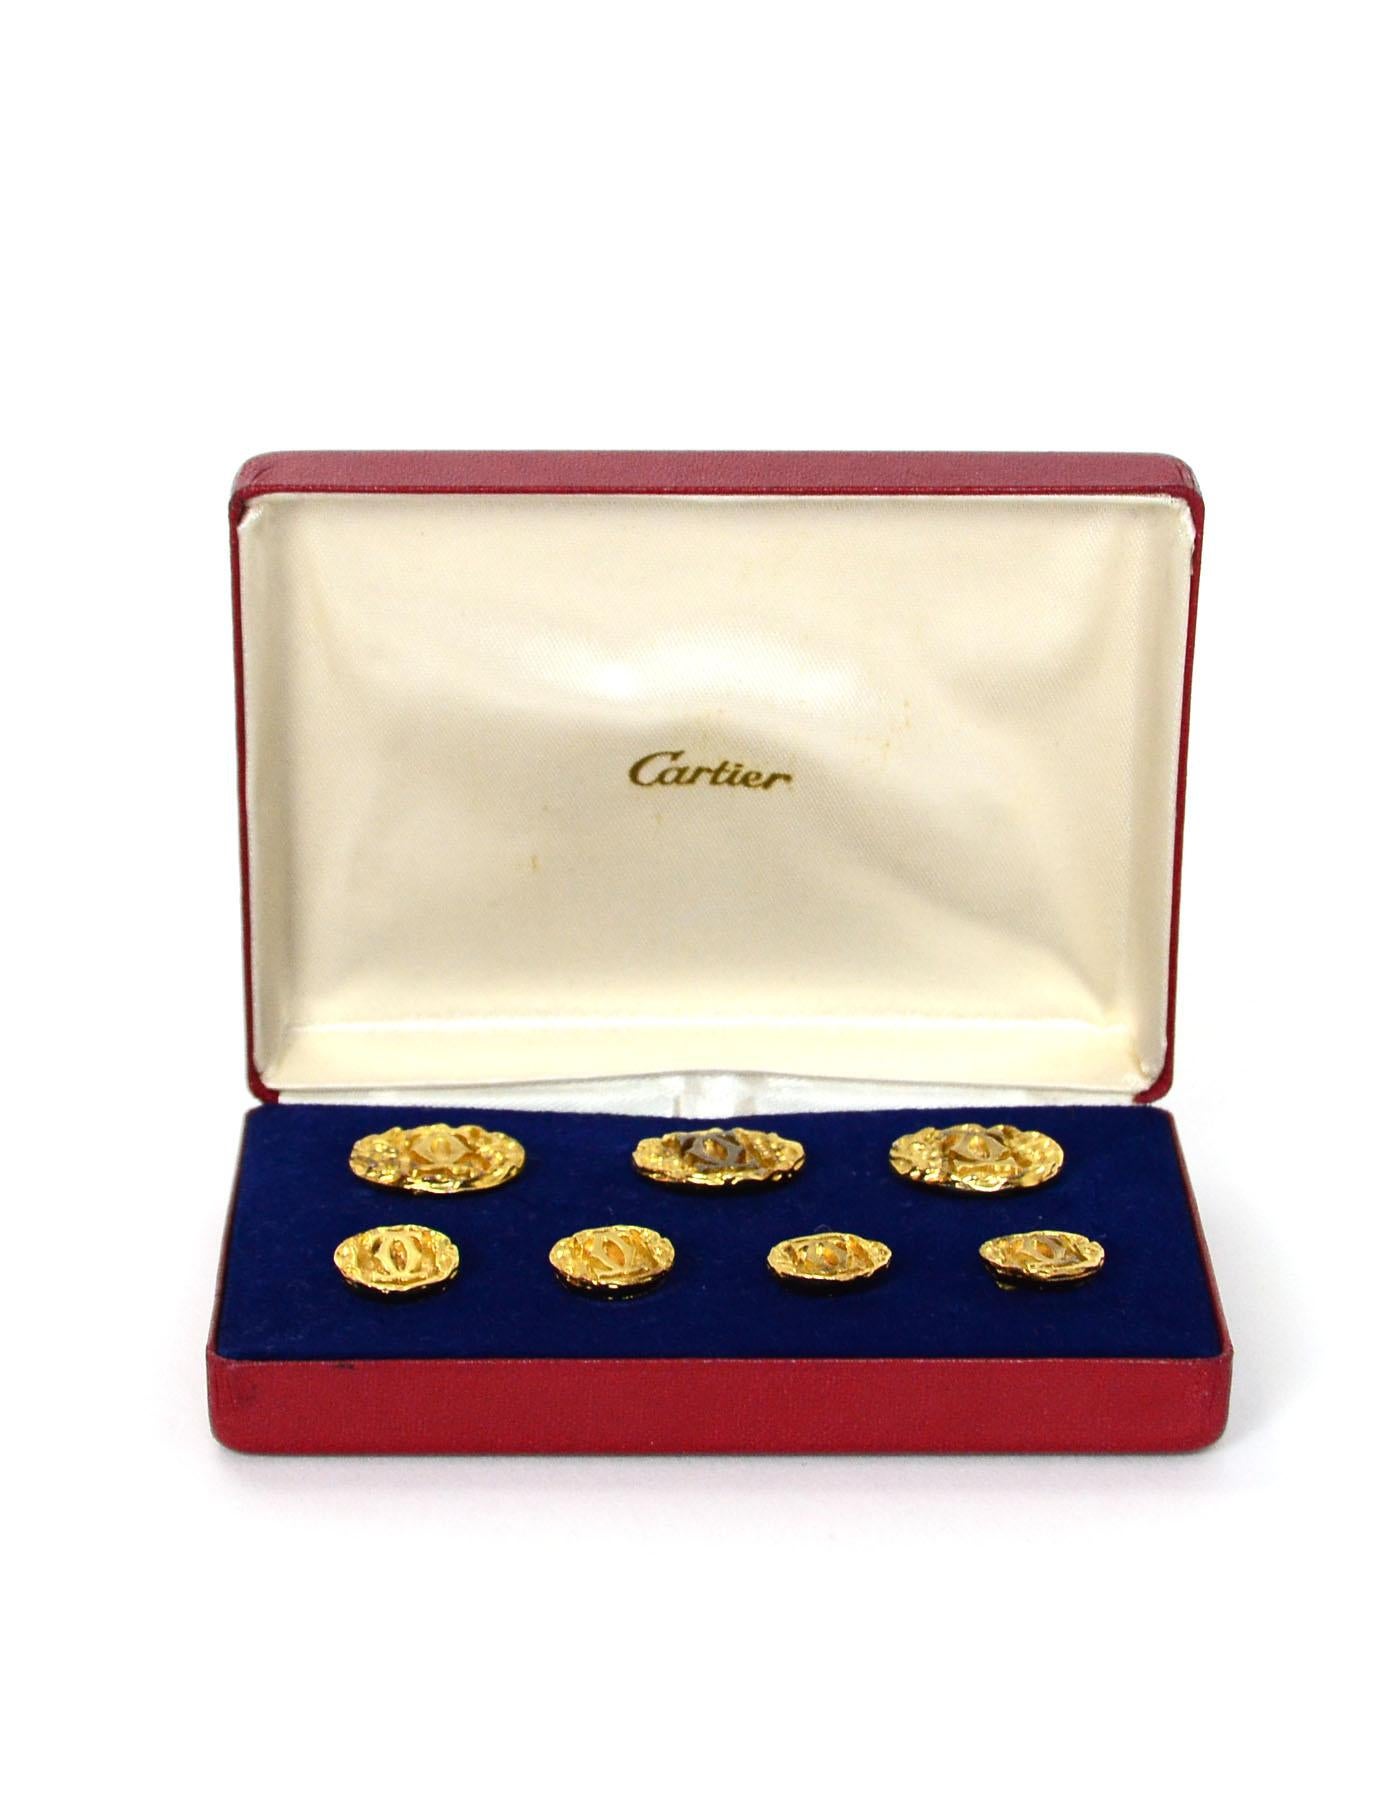 Cartier Set of 7 Vermeil Goldtone Logo Shank Buttons in Box 

Color: Goldtone
Materials:  Sterling 
Hallmarks:   On back of each button: 